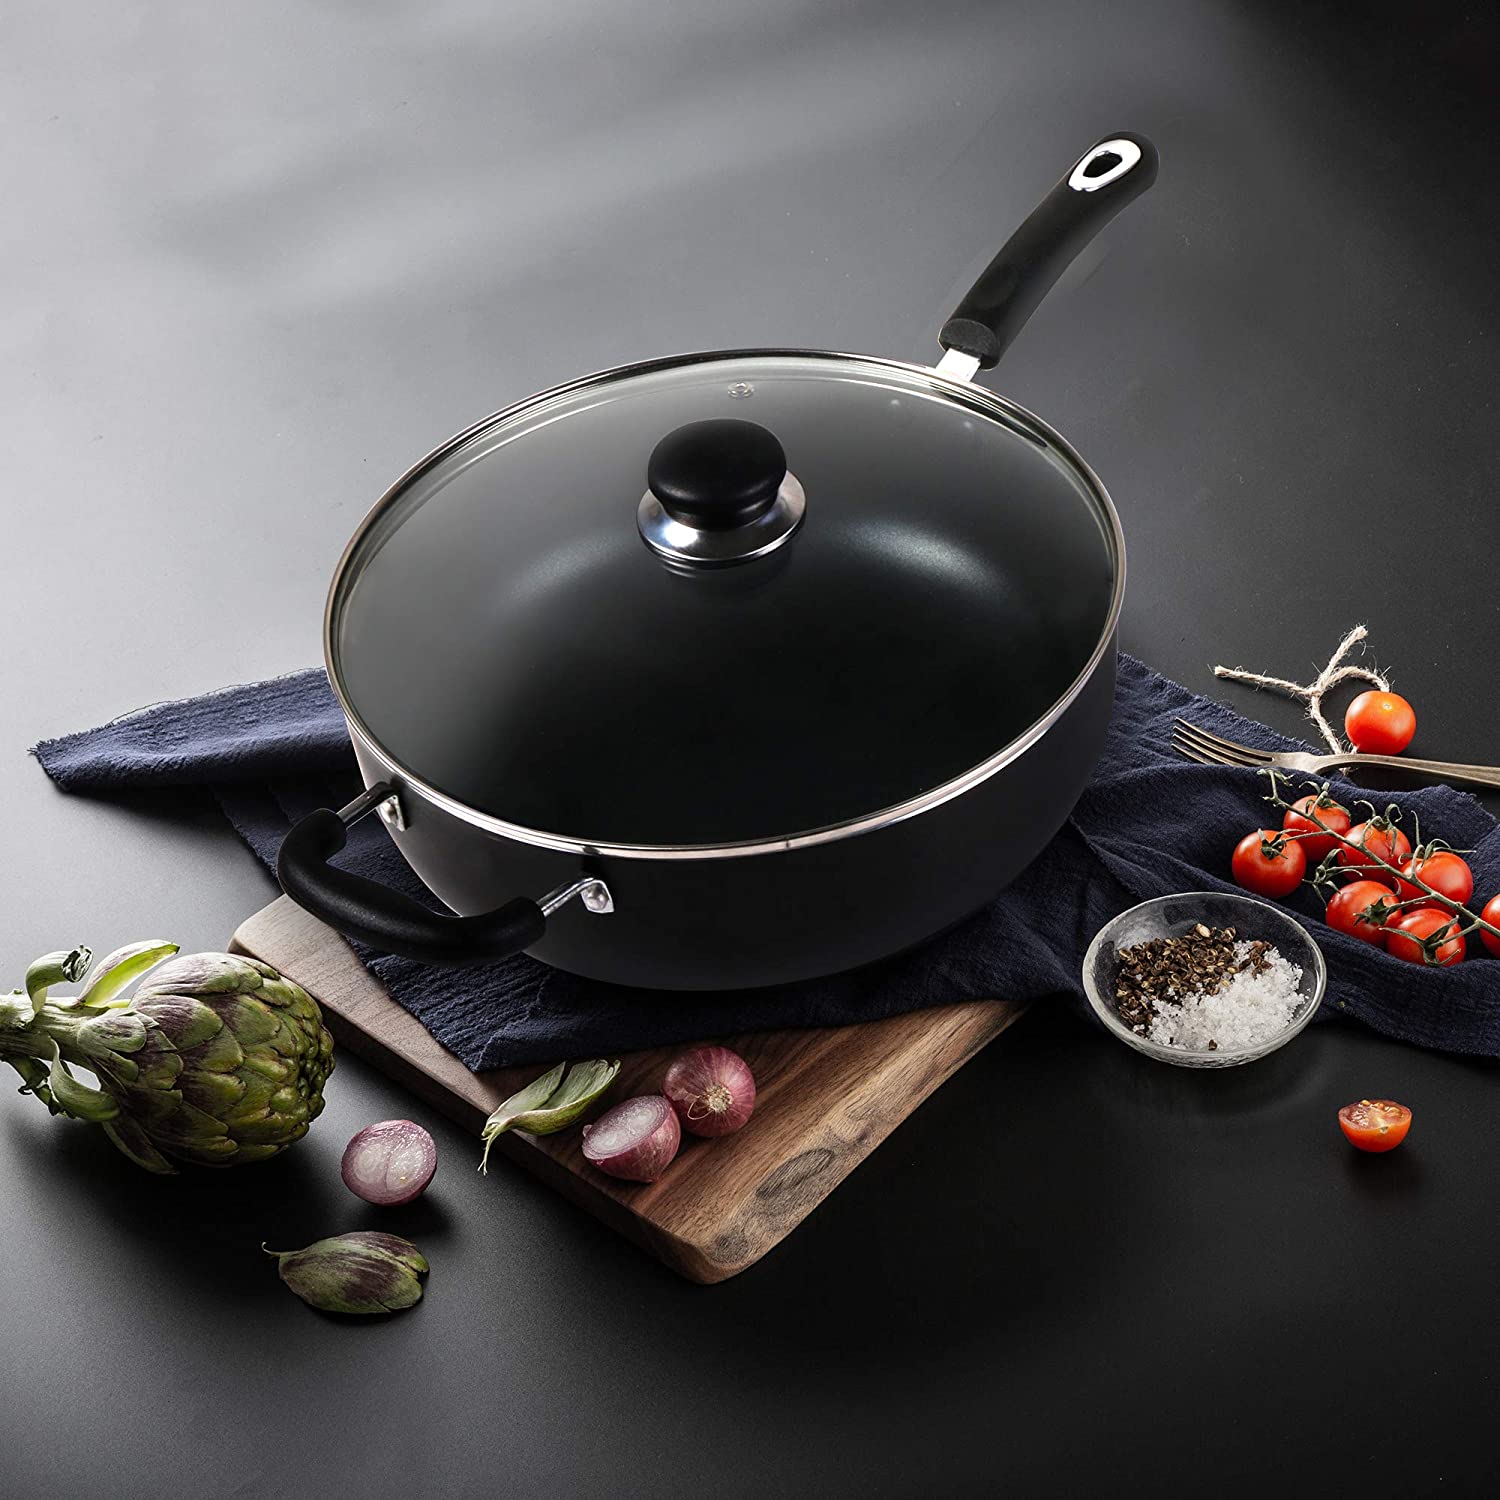 Utopia Kitchen 11 inch Nonstick Frying Pan - Induction Bottom - Aluminum Alloy and Scratch Resistant Body - Riveted Handle